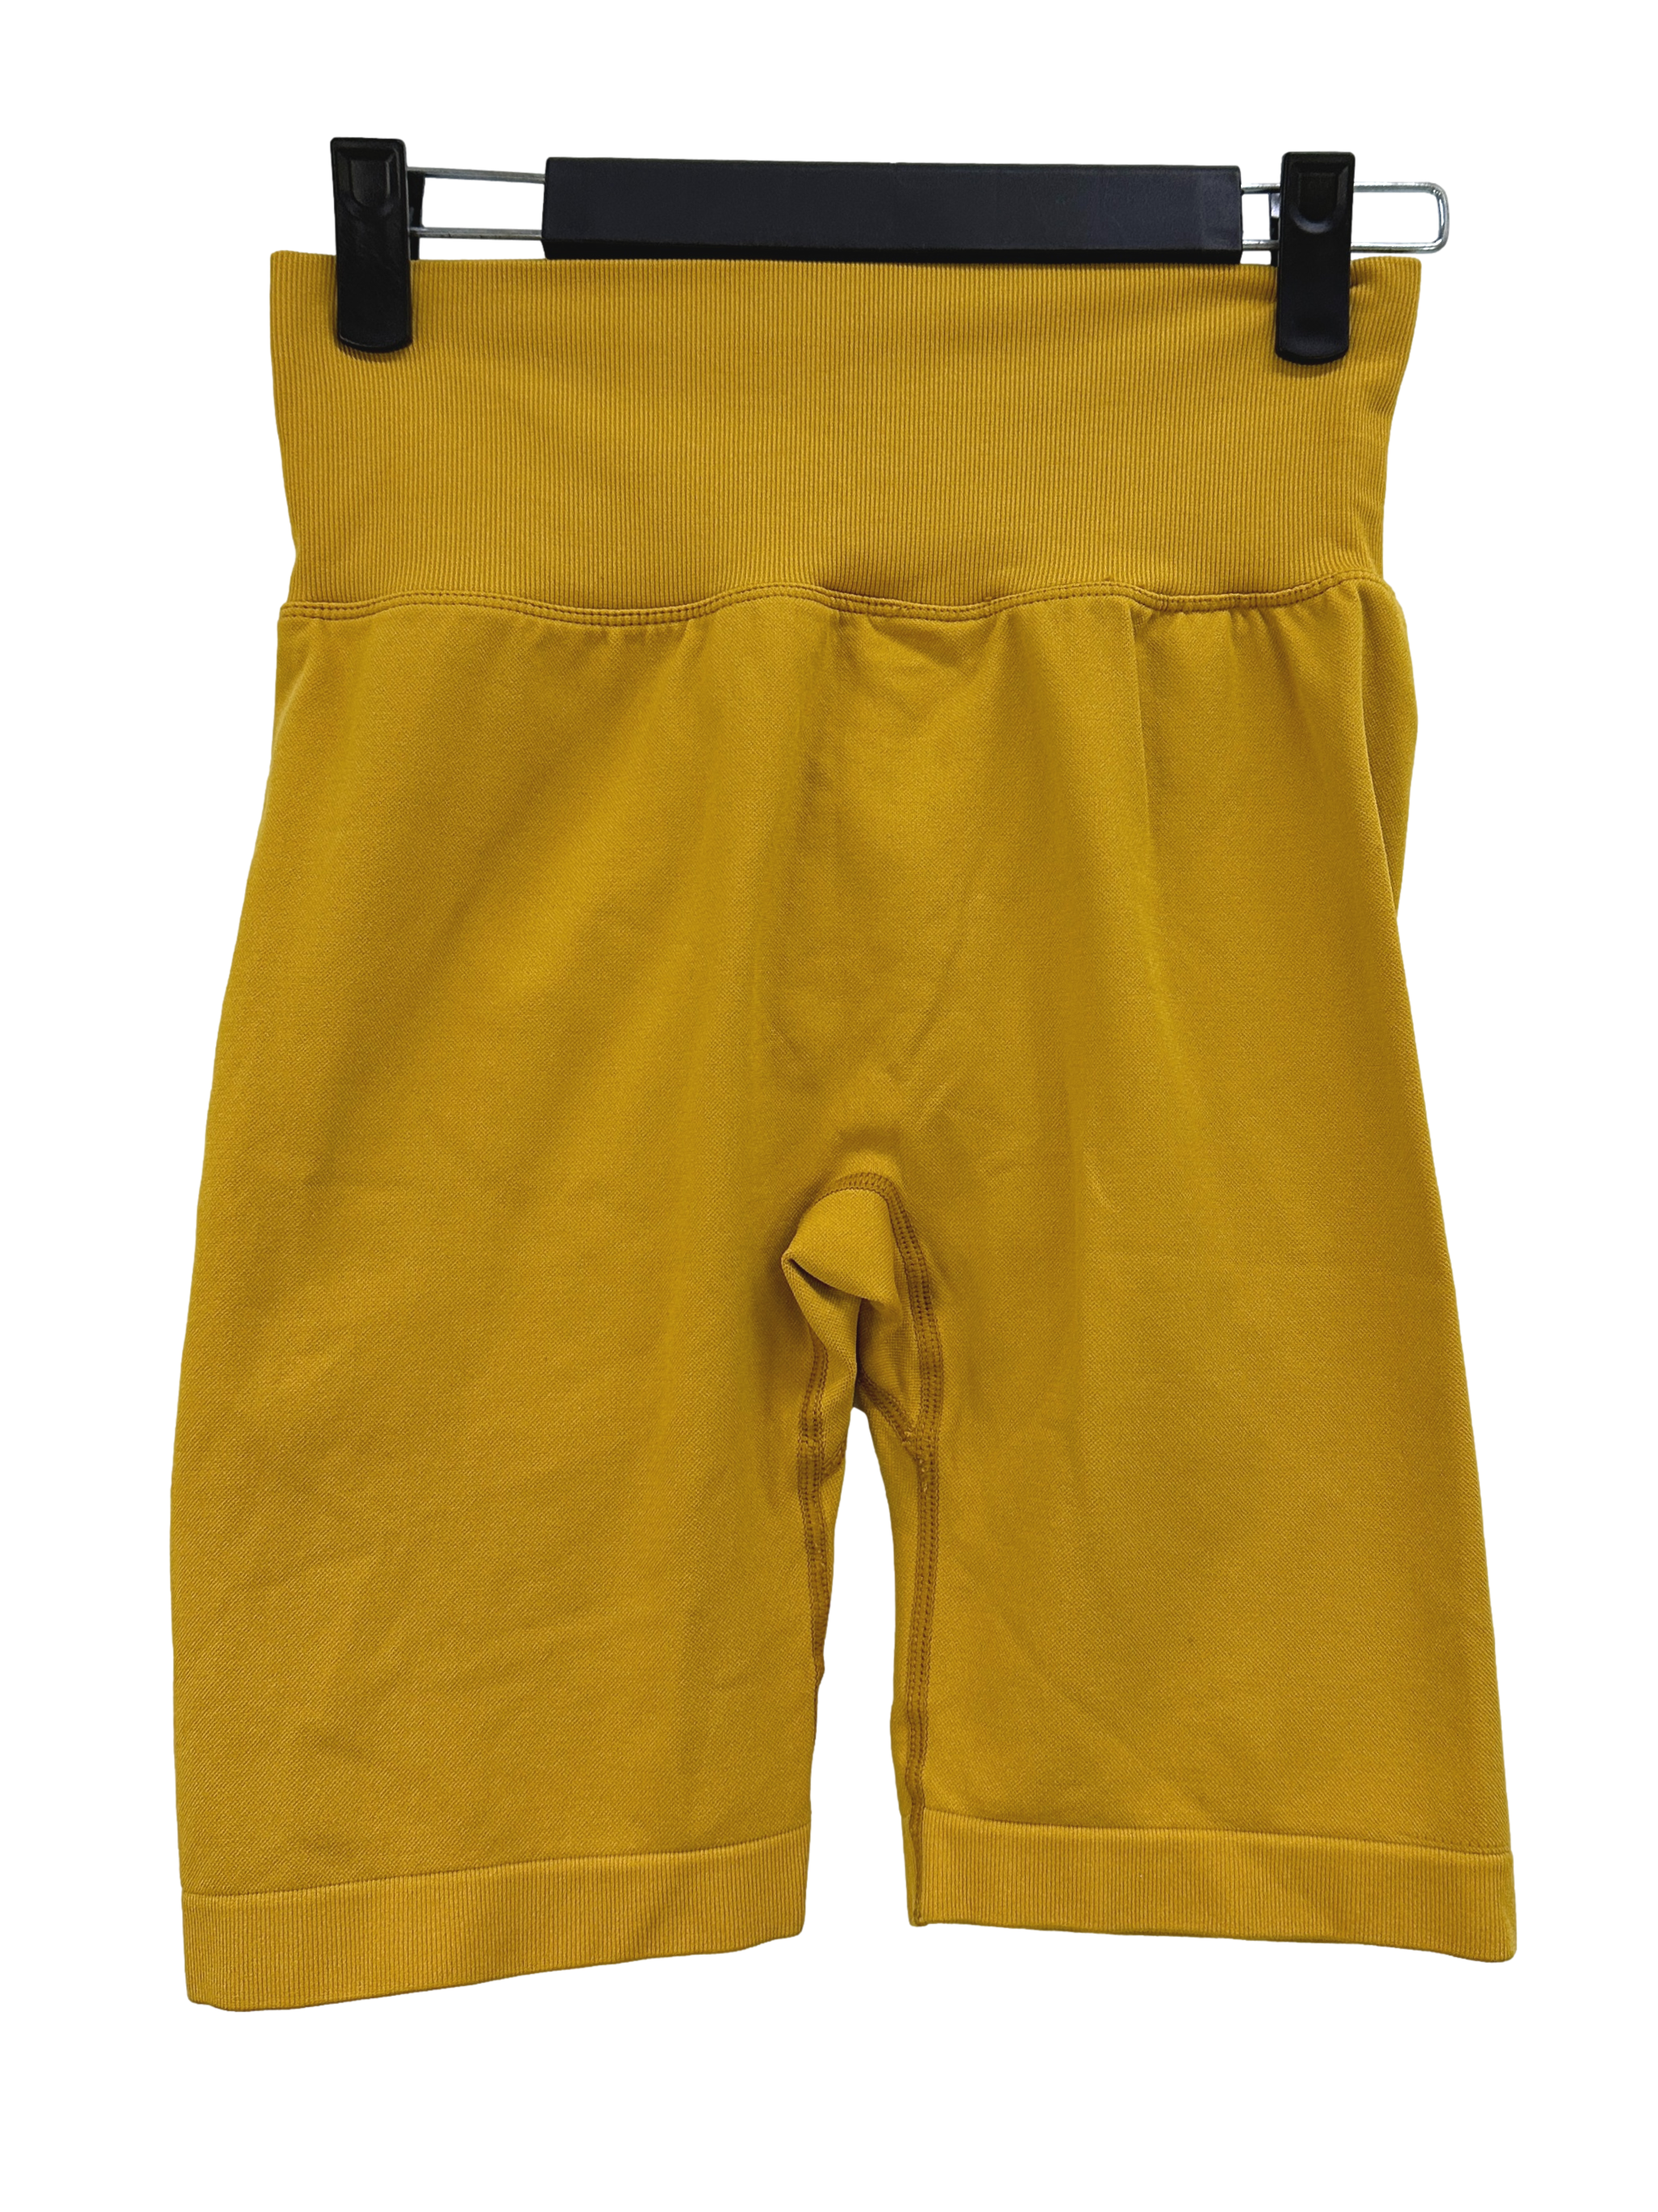 Mustard Yellow High-Waisted Ruched Bicycle Shorts